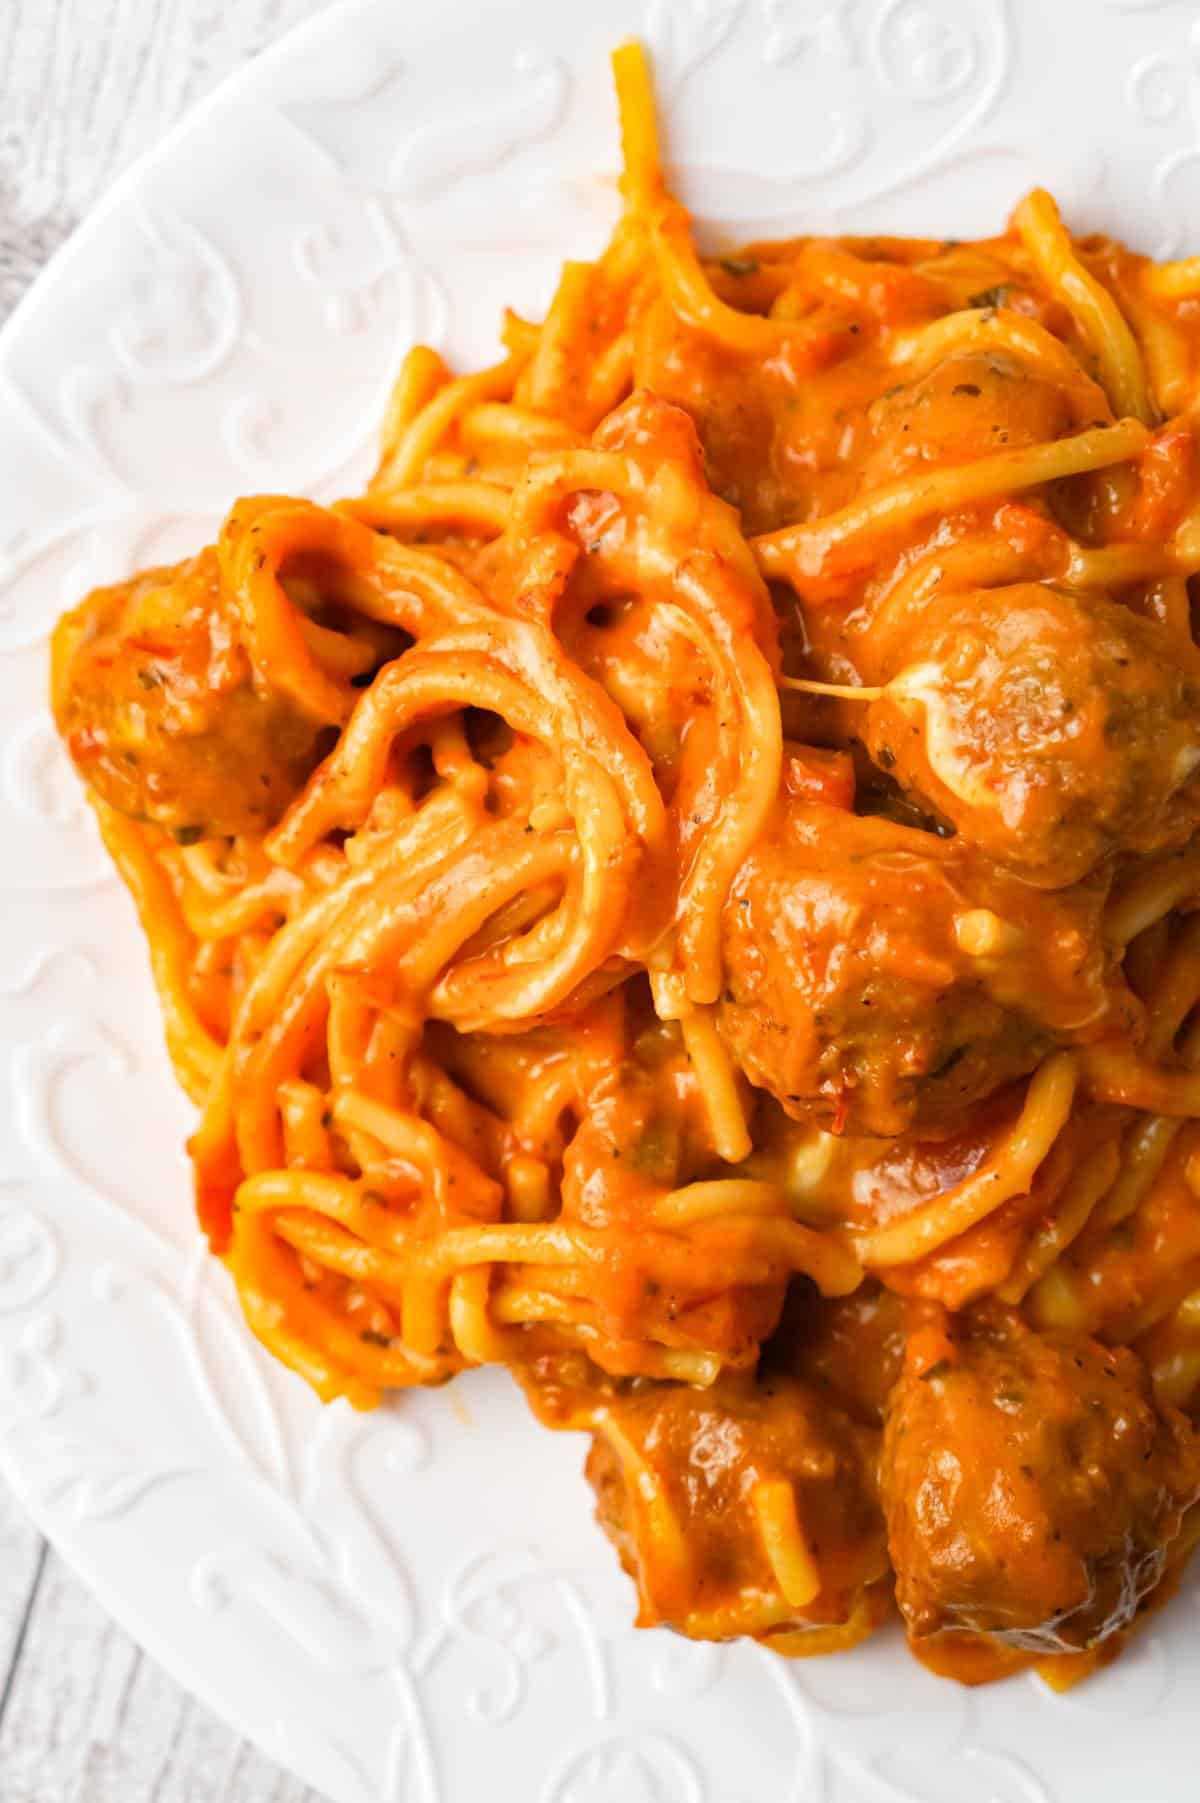 Instant Pot Cheesy Spaghetti and Meatballs is an easy and delicious pressure cooker pasta recipe loaded with Italian meatballs, shredded mozzarella and cheddar cheese and marinara sauce.